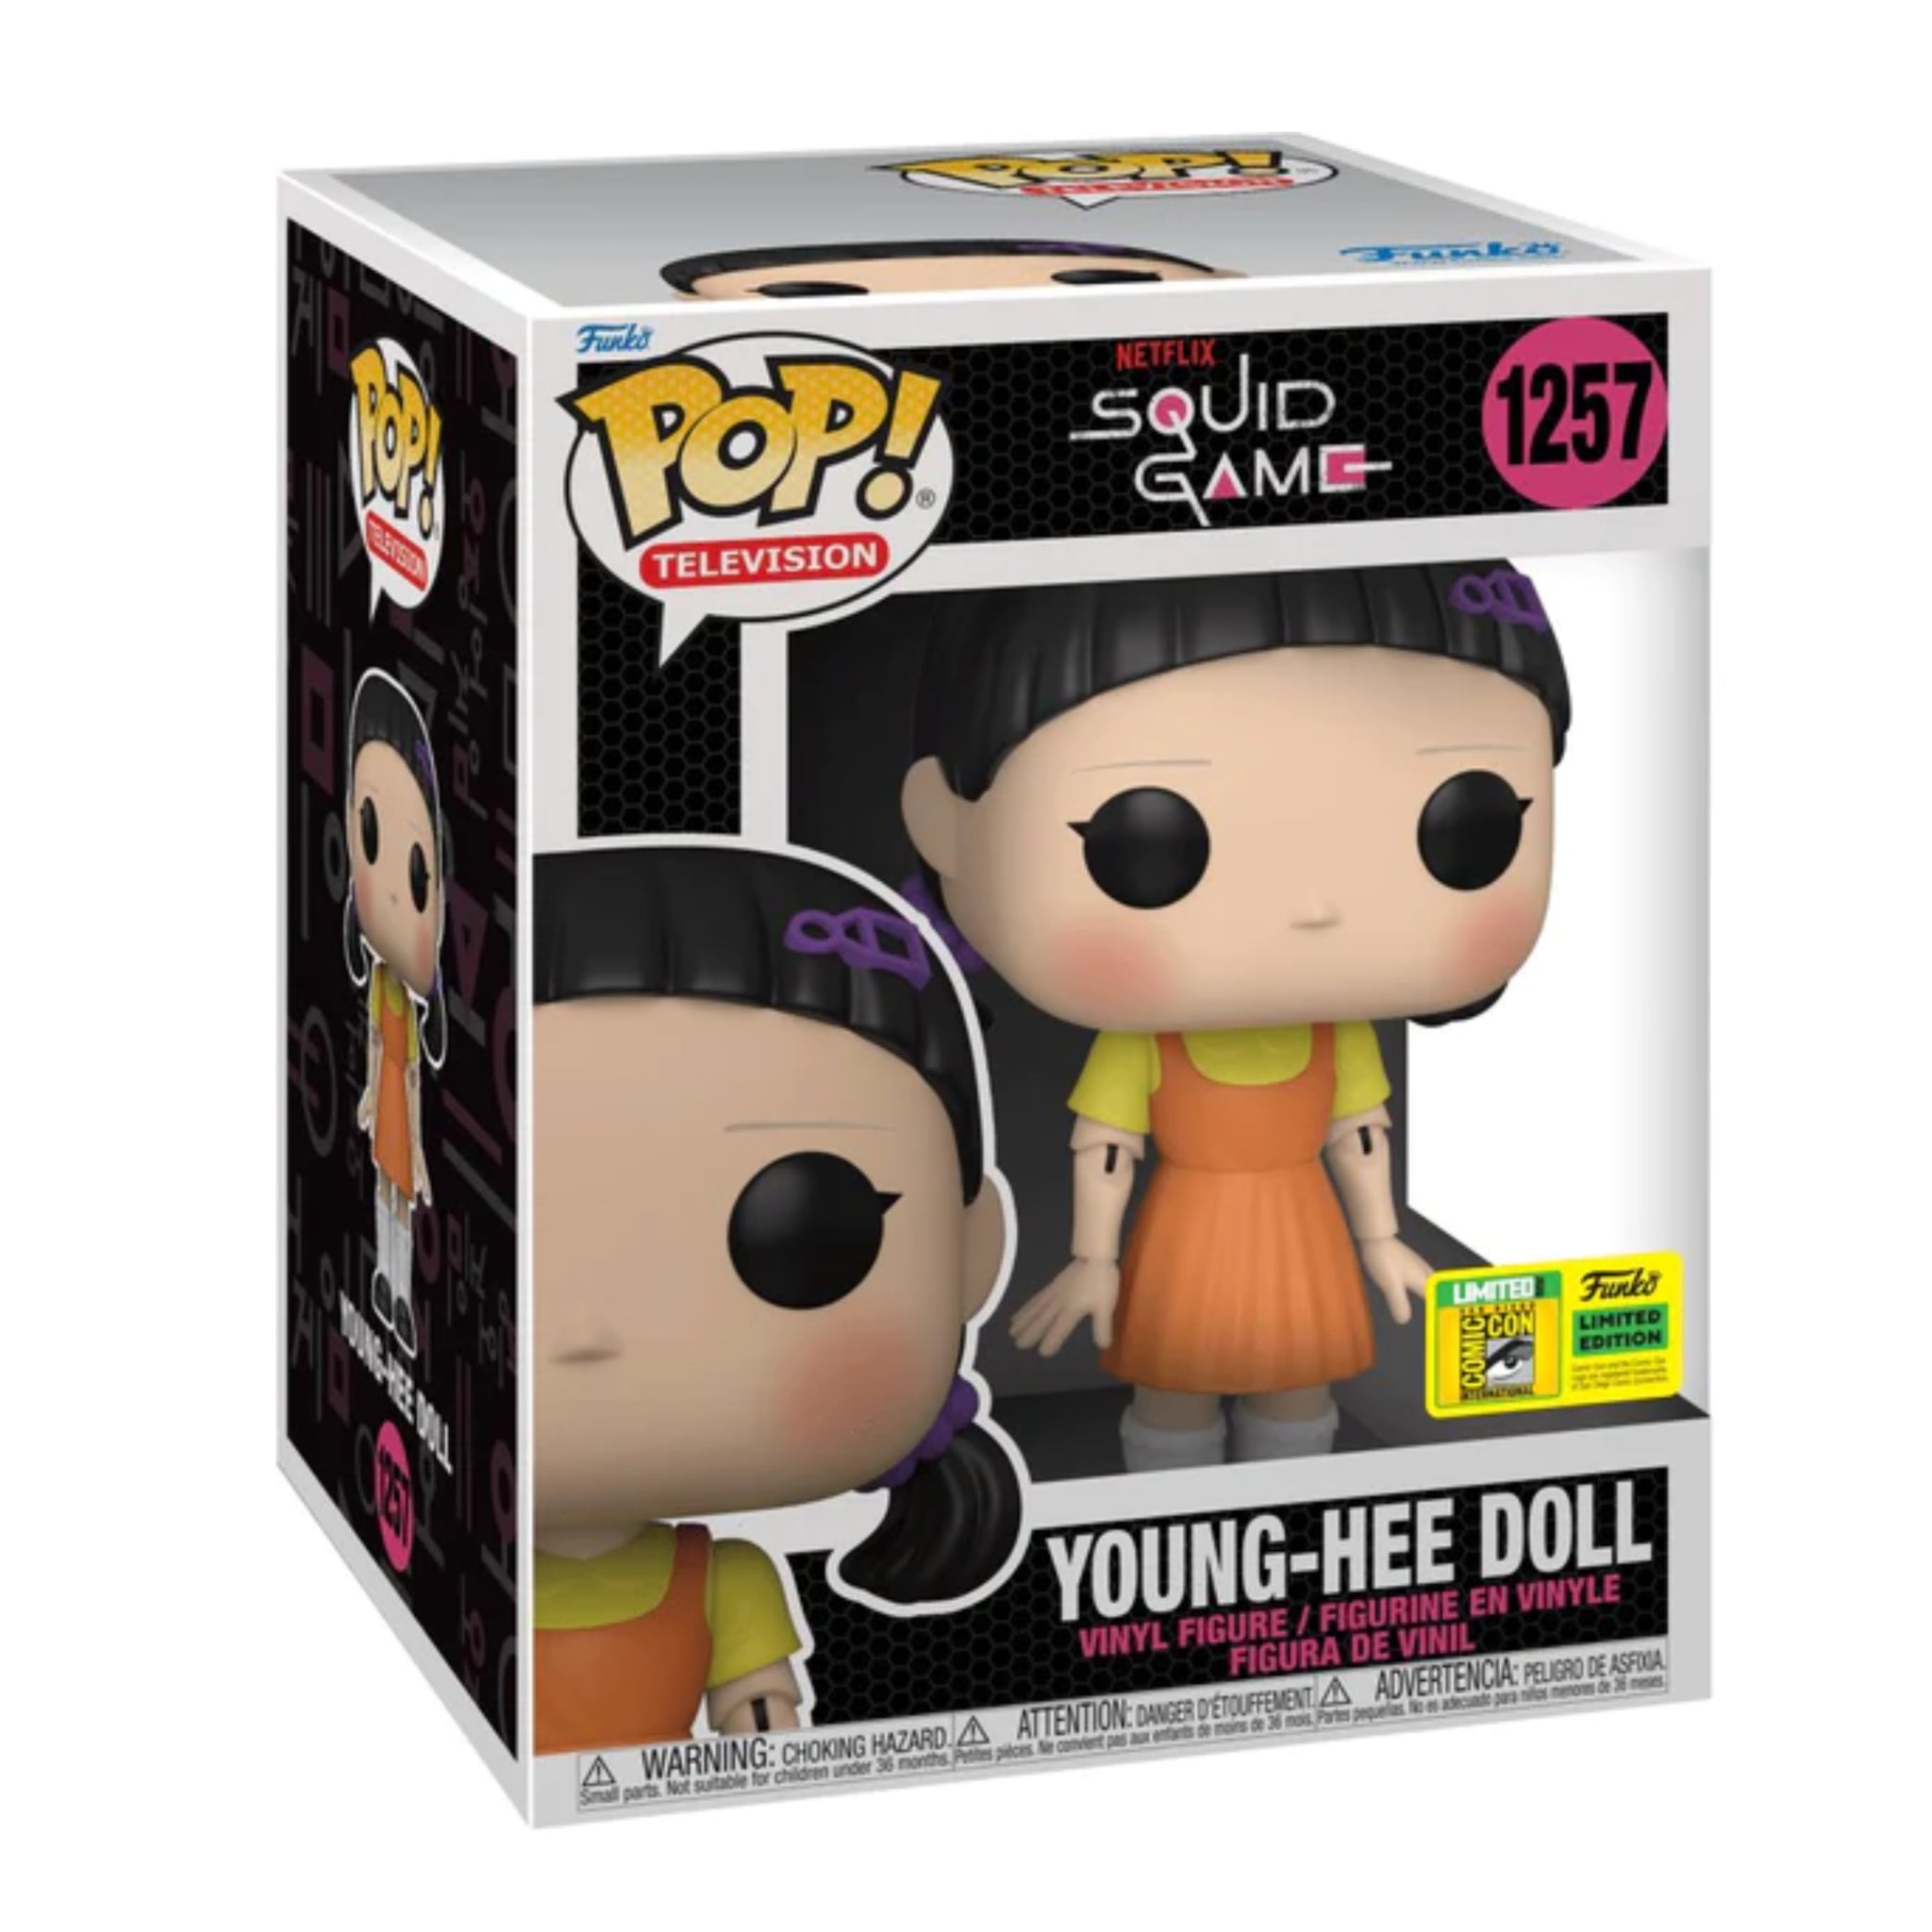 Young-Hee Doll Funko Pop! SAN DIEGO COMIC CON